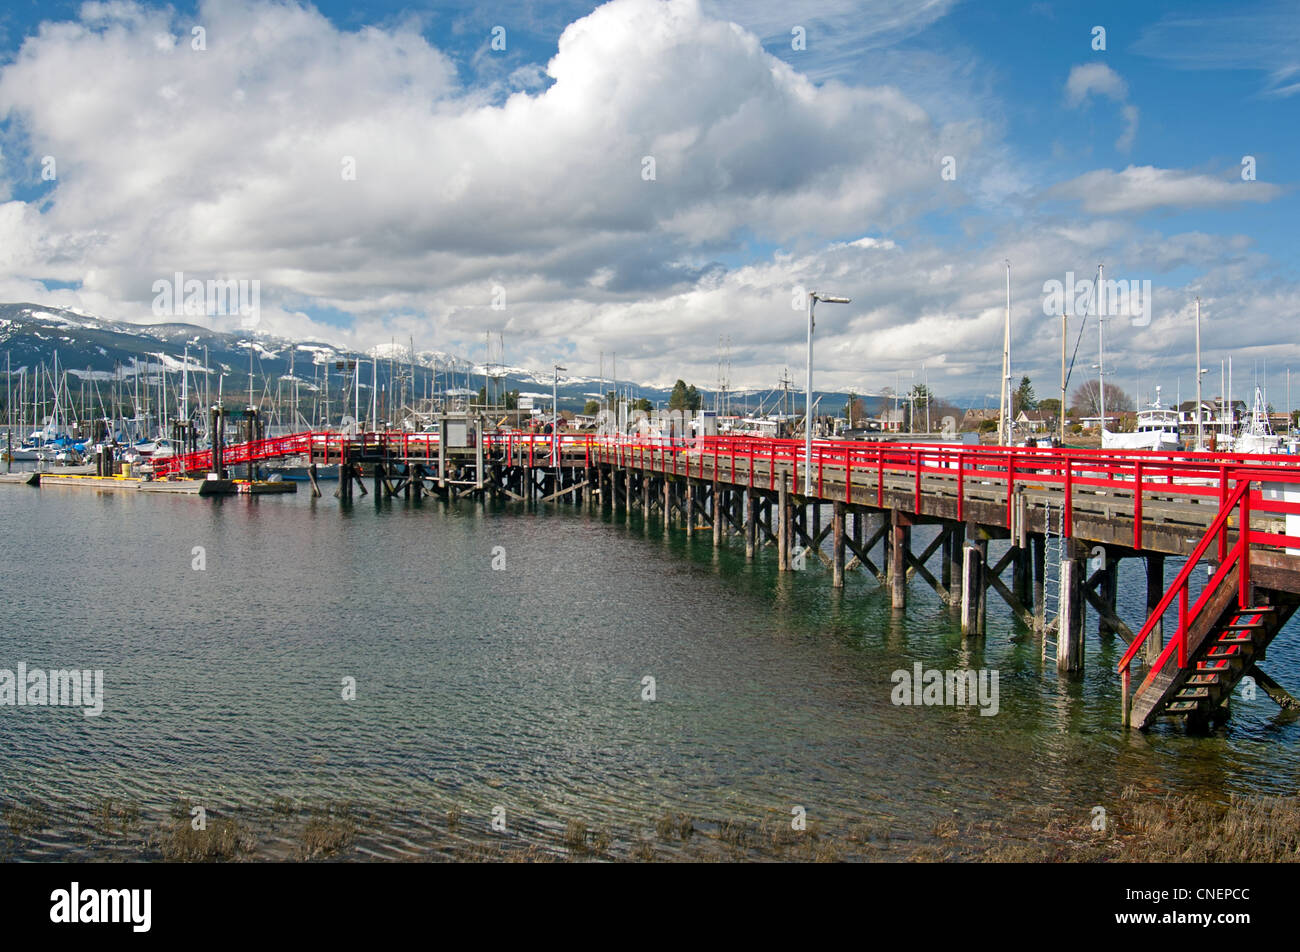 The Fishing Harbour of Deep Bay, on Vancouver Island, British Columbia Canada.  SCO 8146 Stock Photo